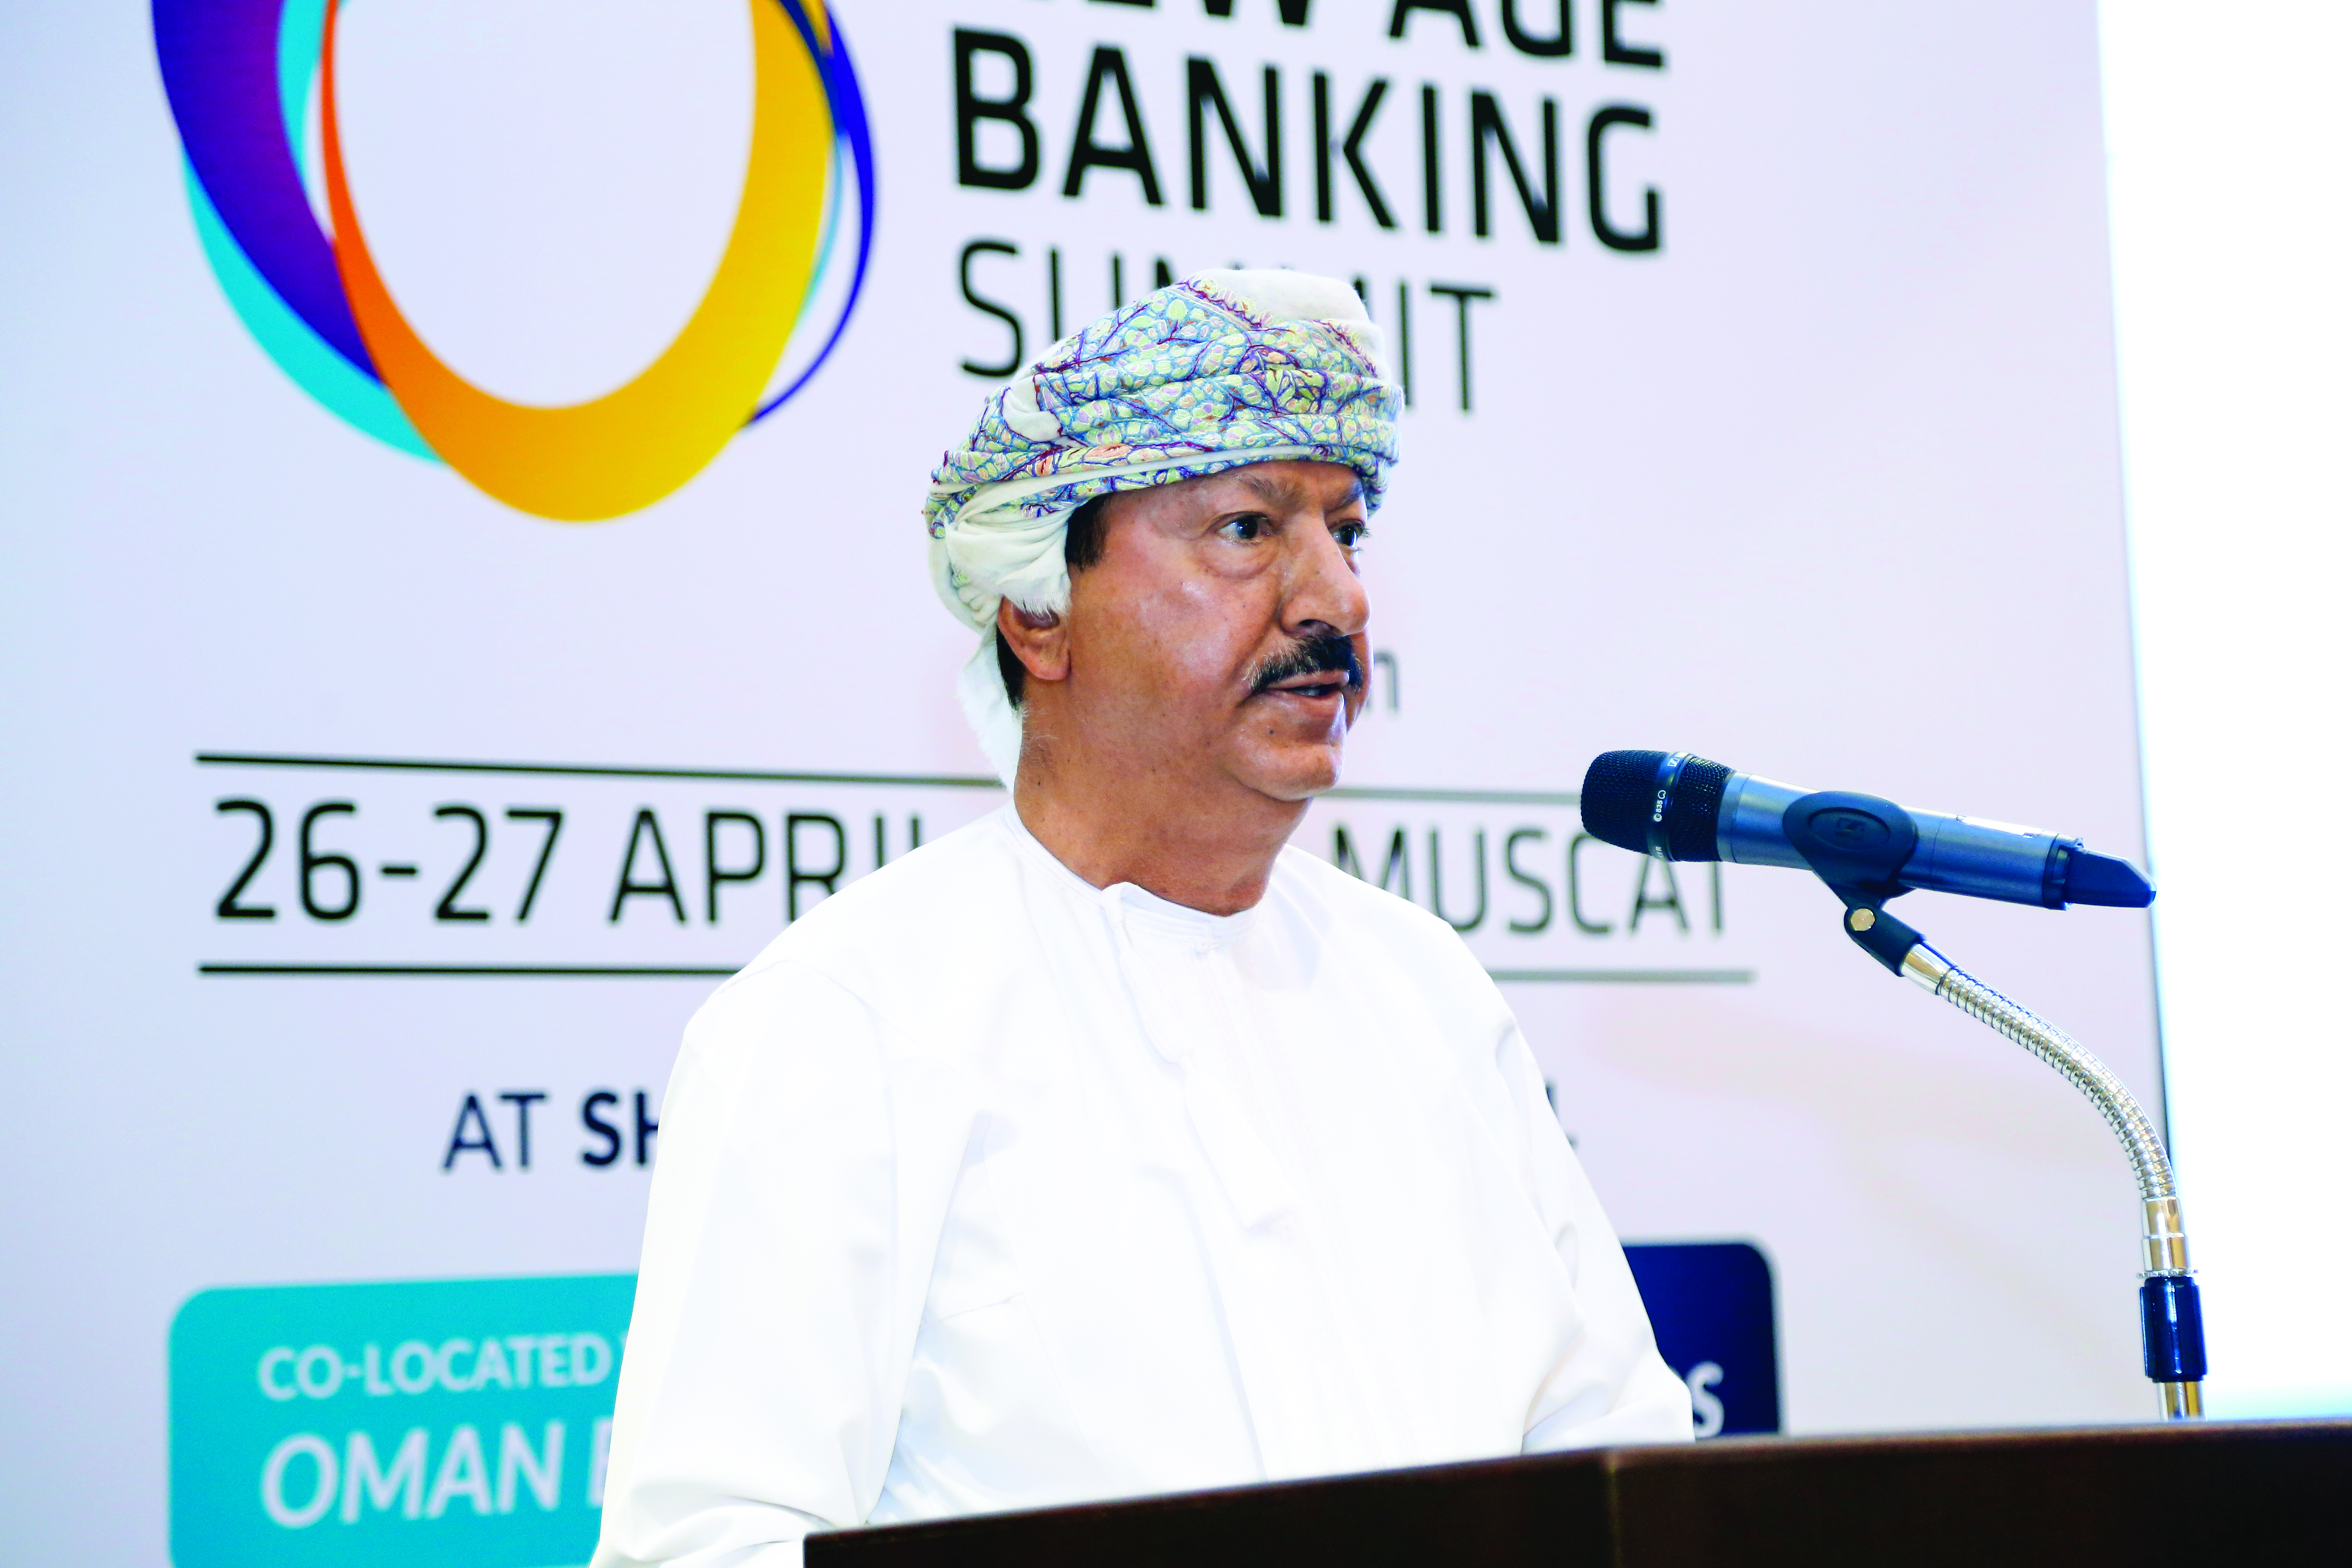 Liquidity situation improving in Oman, say bankers